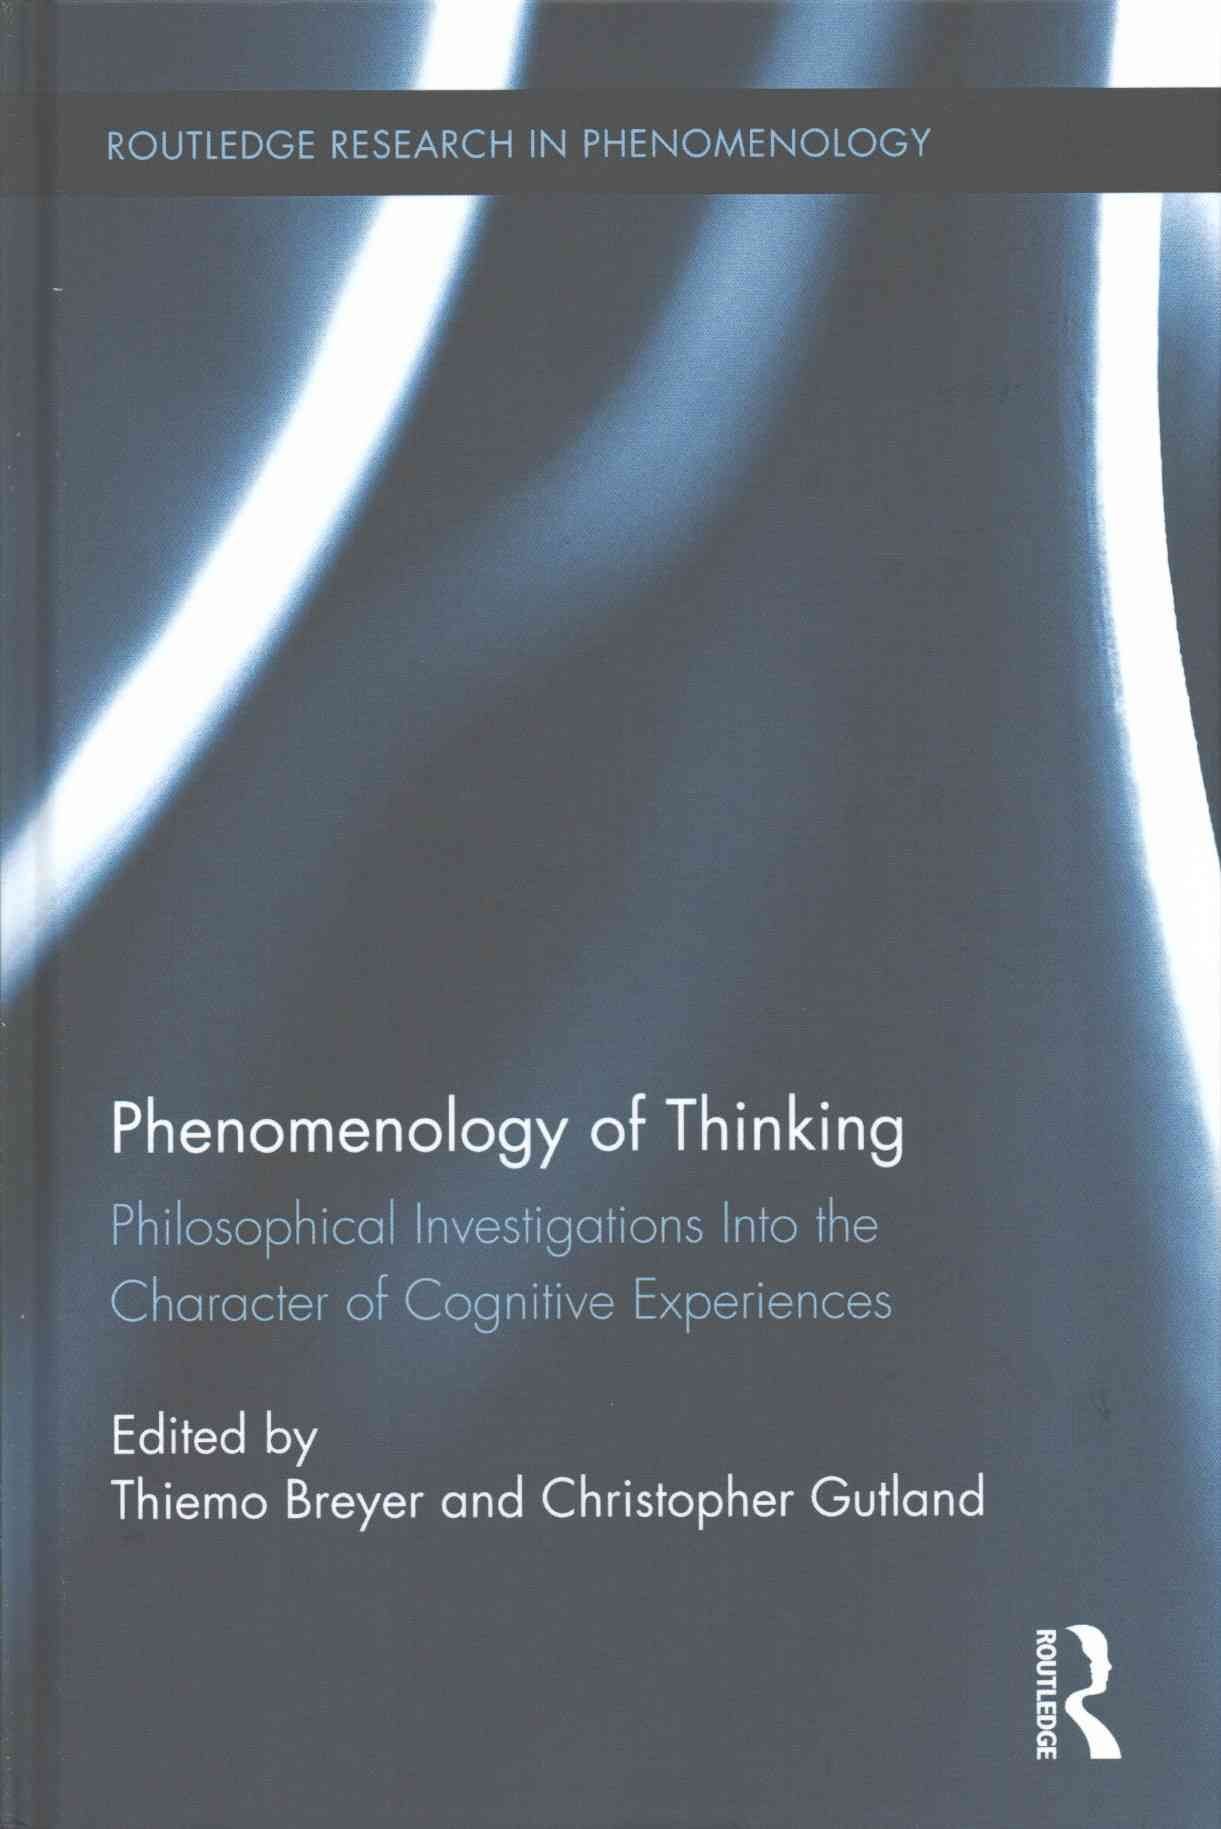 Free　Thiemo　of　Breyer　Thinking　With　by　Delivery　Buy　Phenomenology